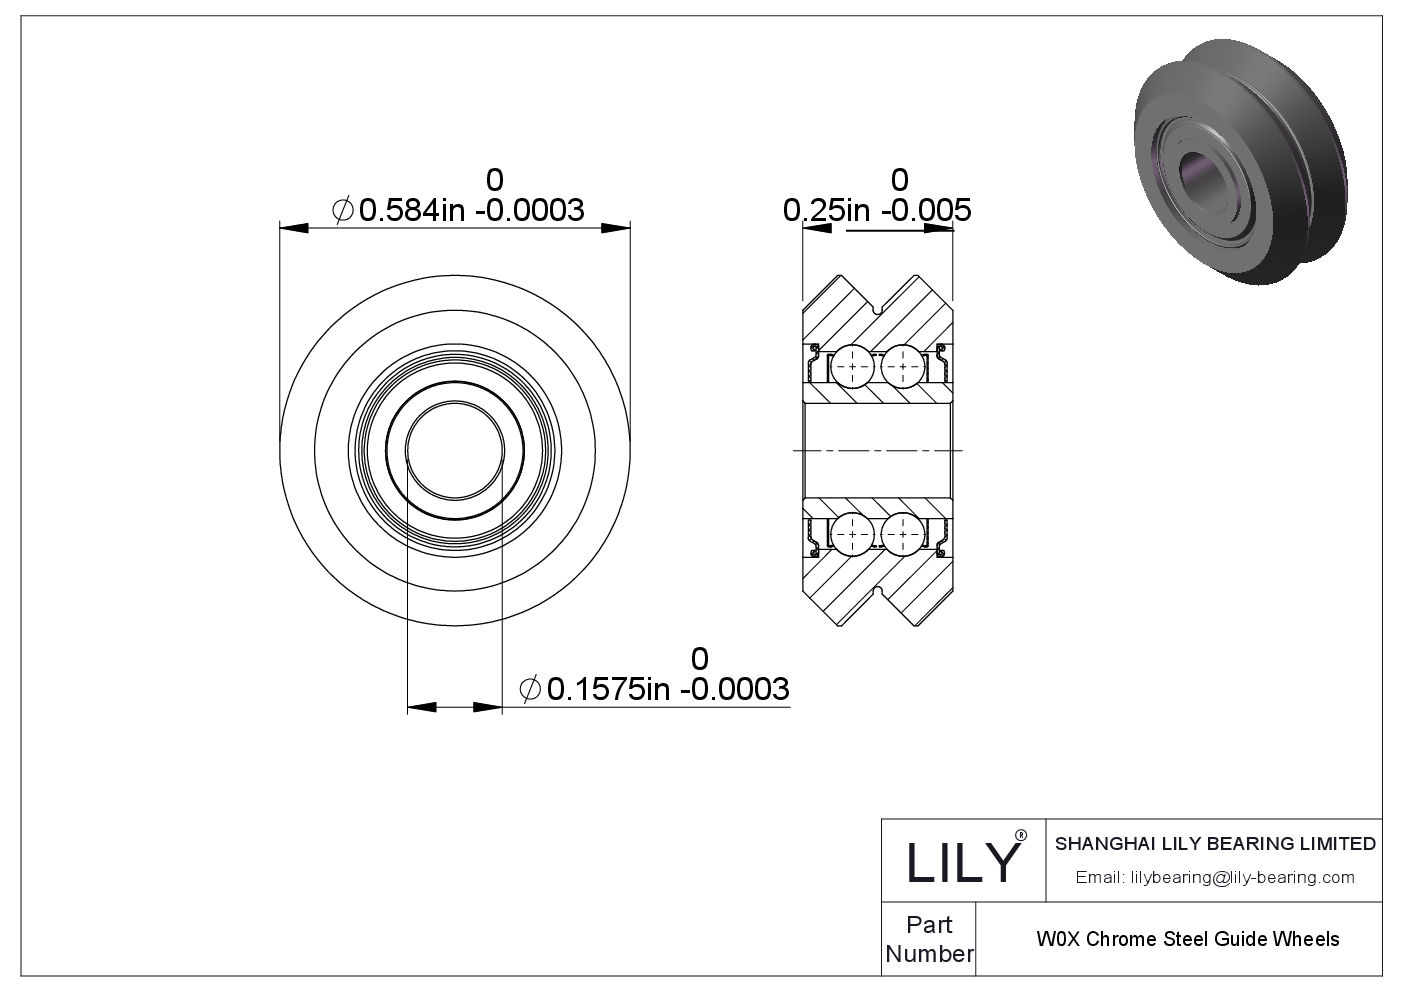 W0X Chrome Steel Guide Wheels cad drawing